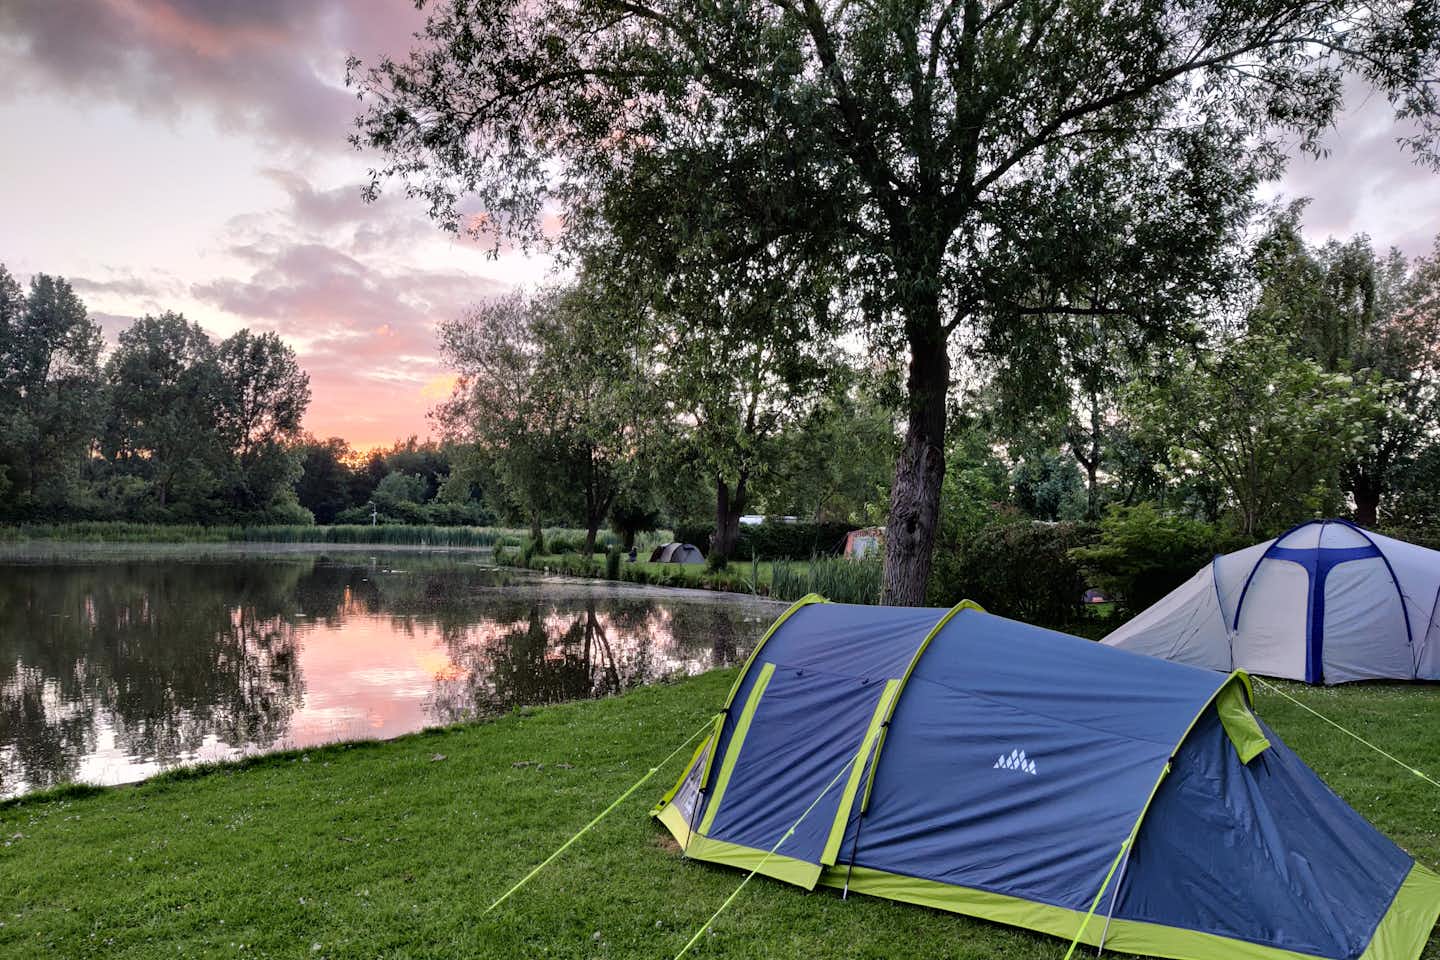 Camping Taniaburg - Zeltwiese am Ufer des Sees